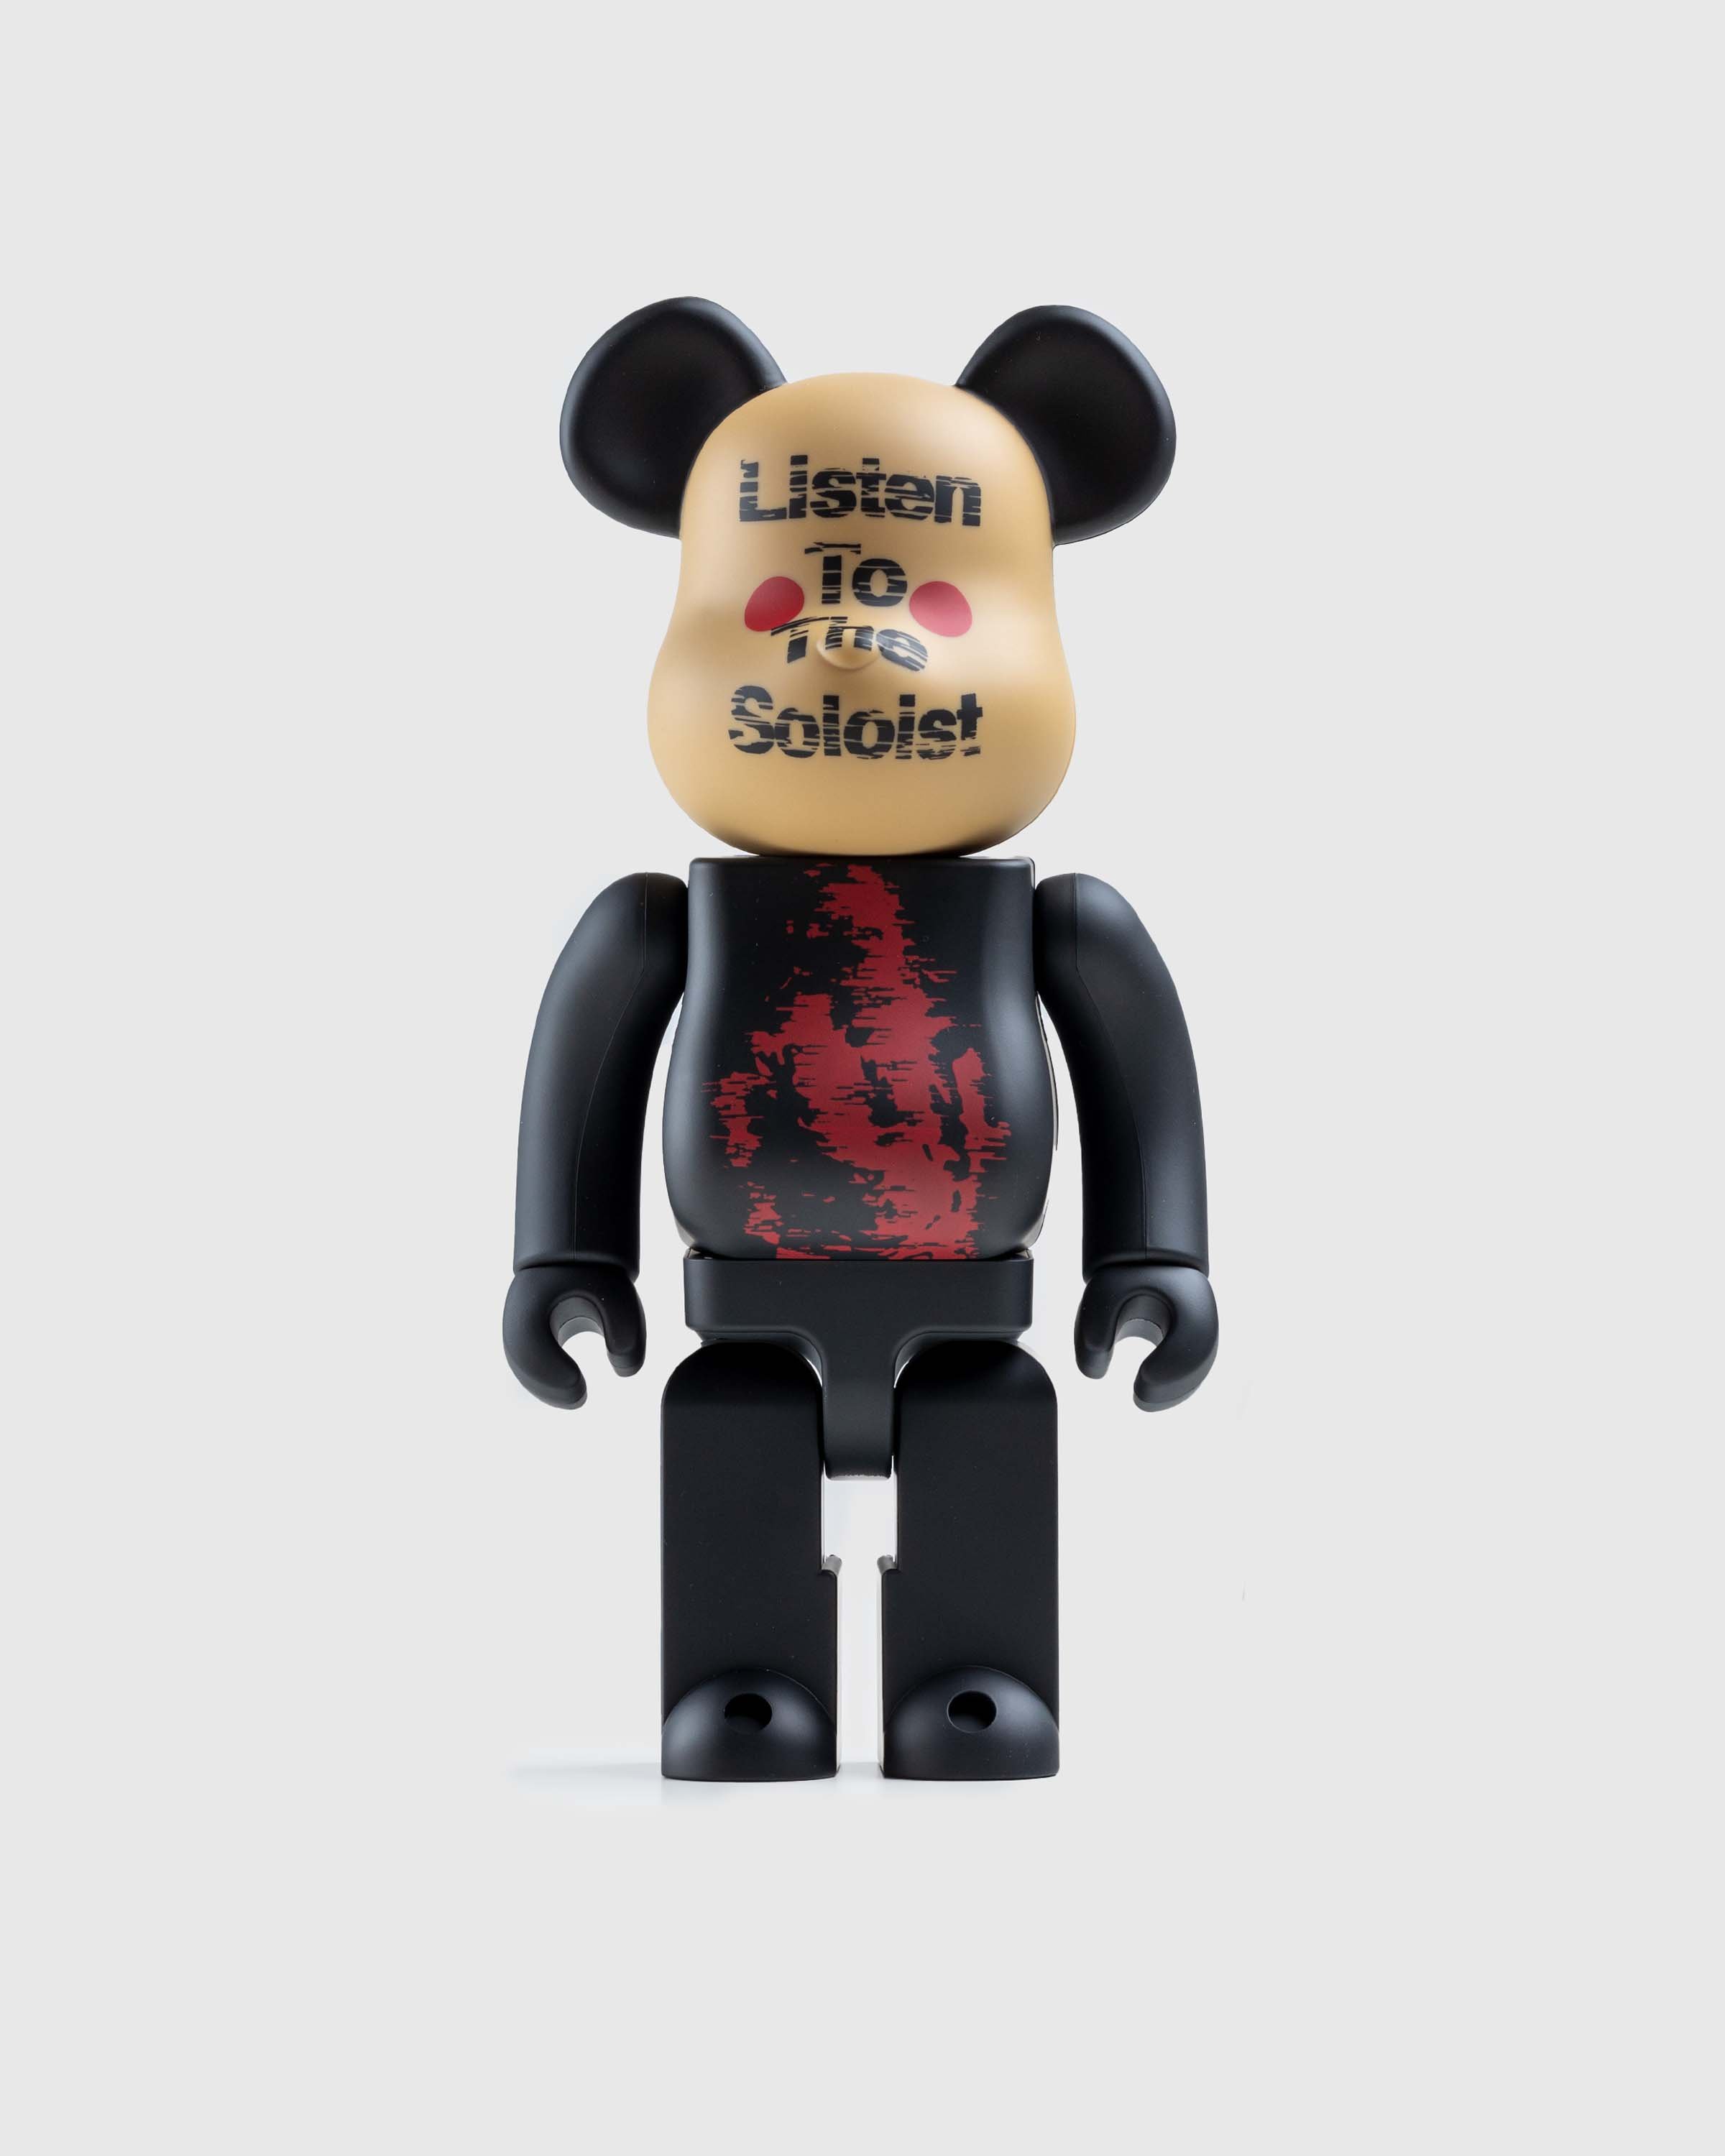 Highsnobiety  Are Bearbricks a Good Investment in 2023?